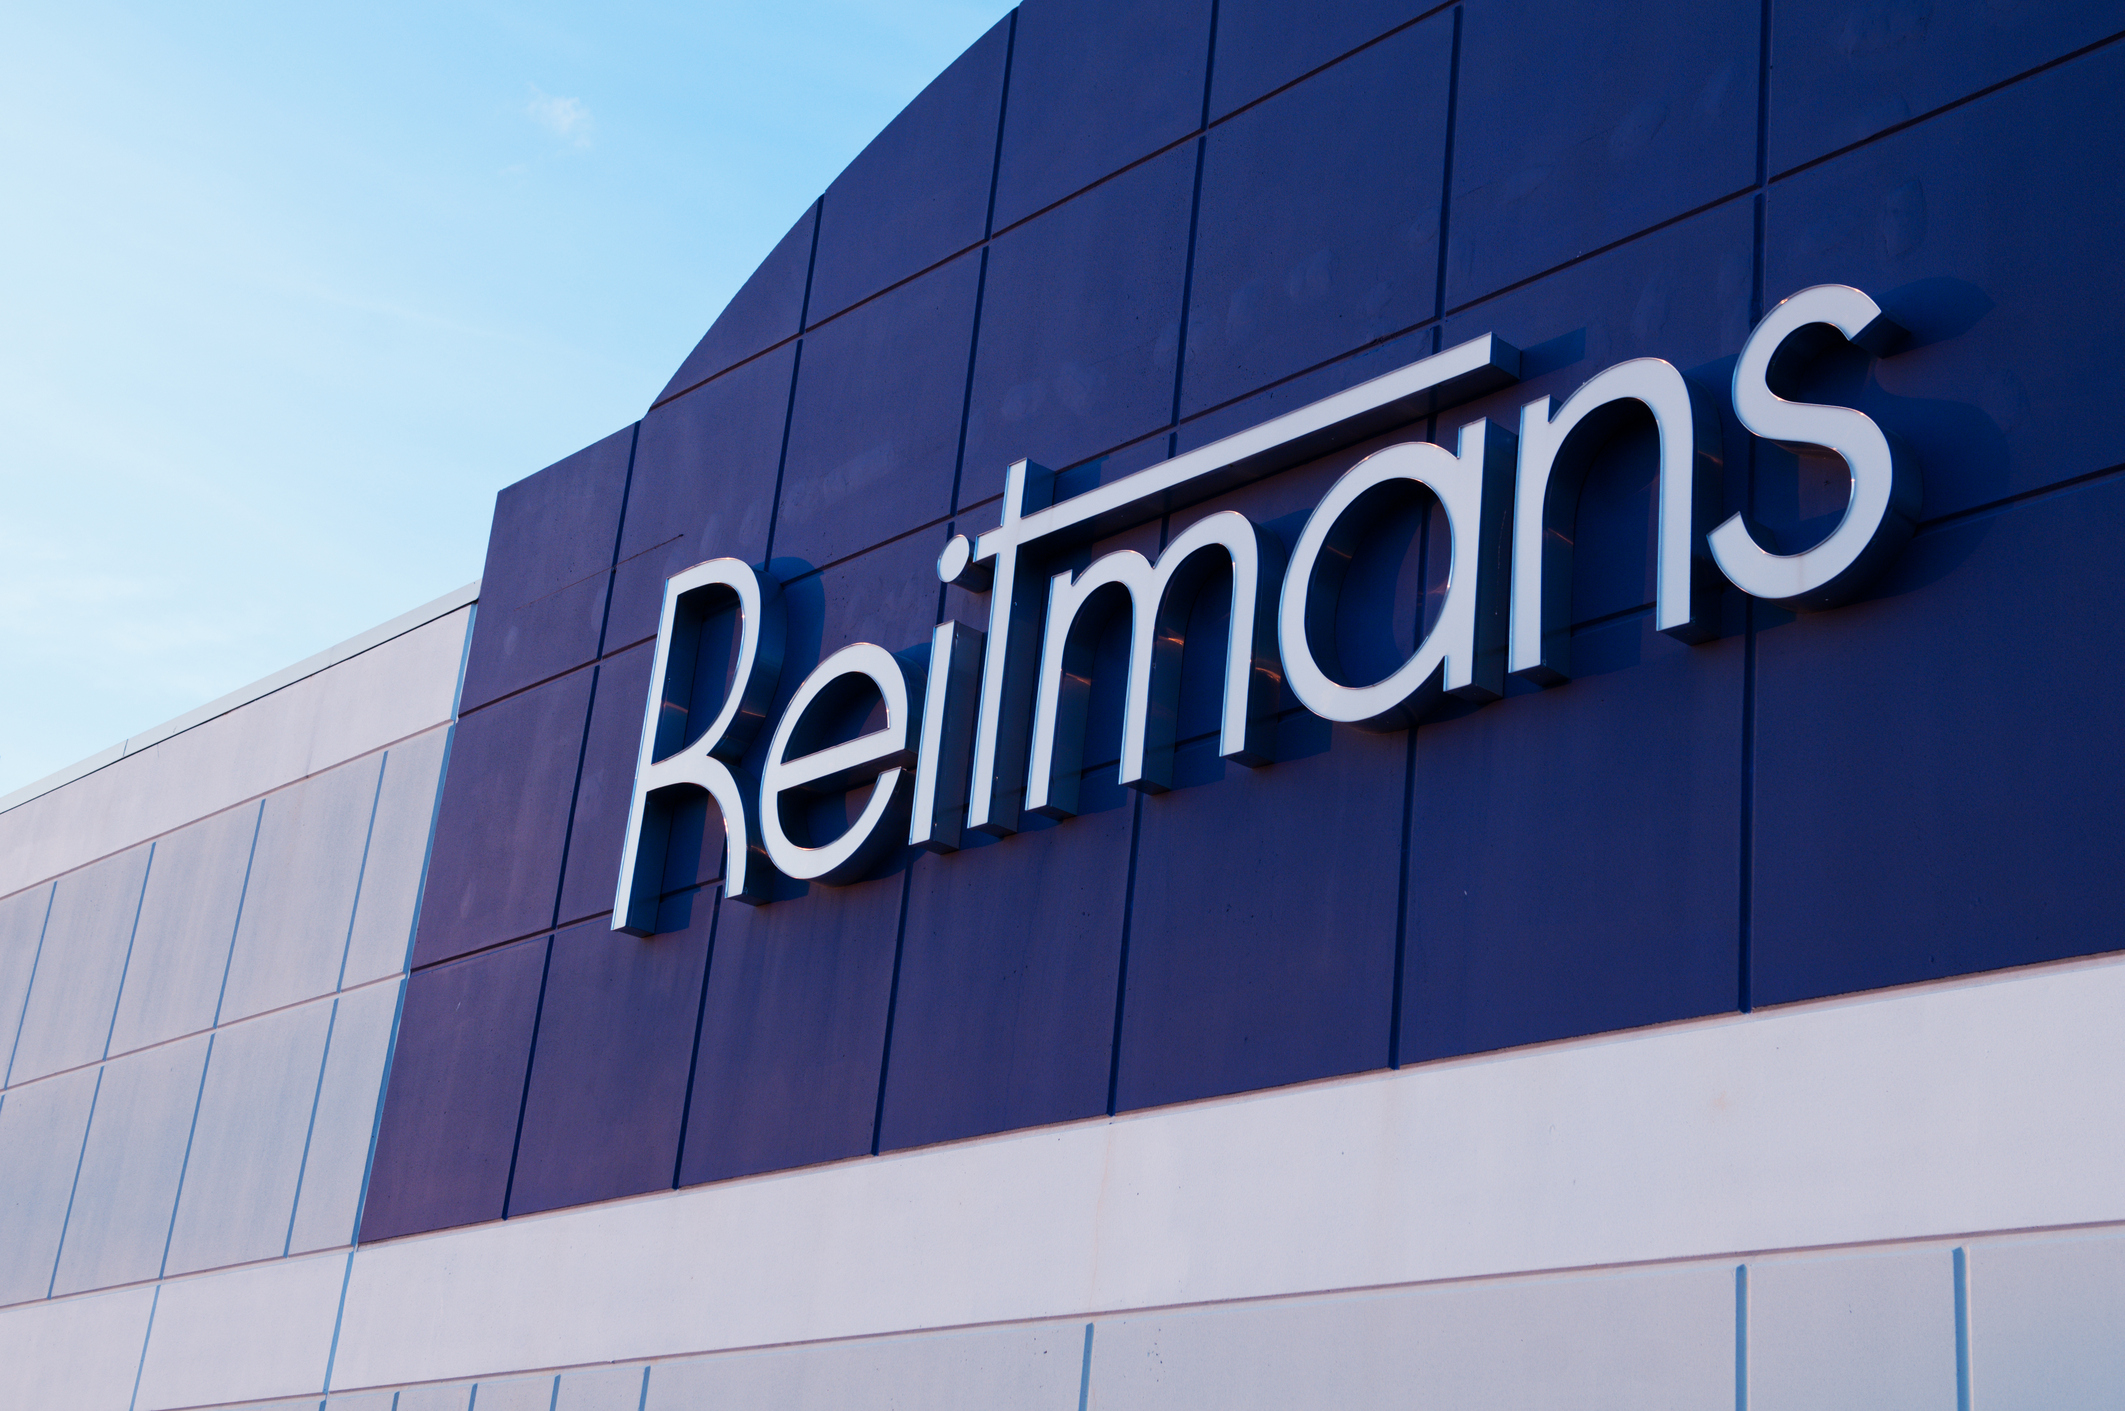 Reitmans Is The Latest Canadian Retailer To File For Creditor Protection